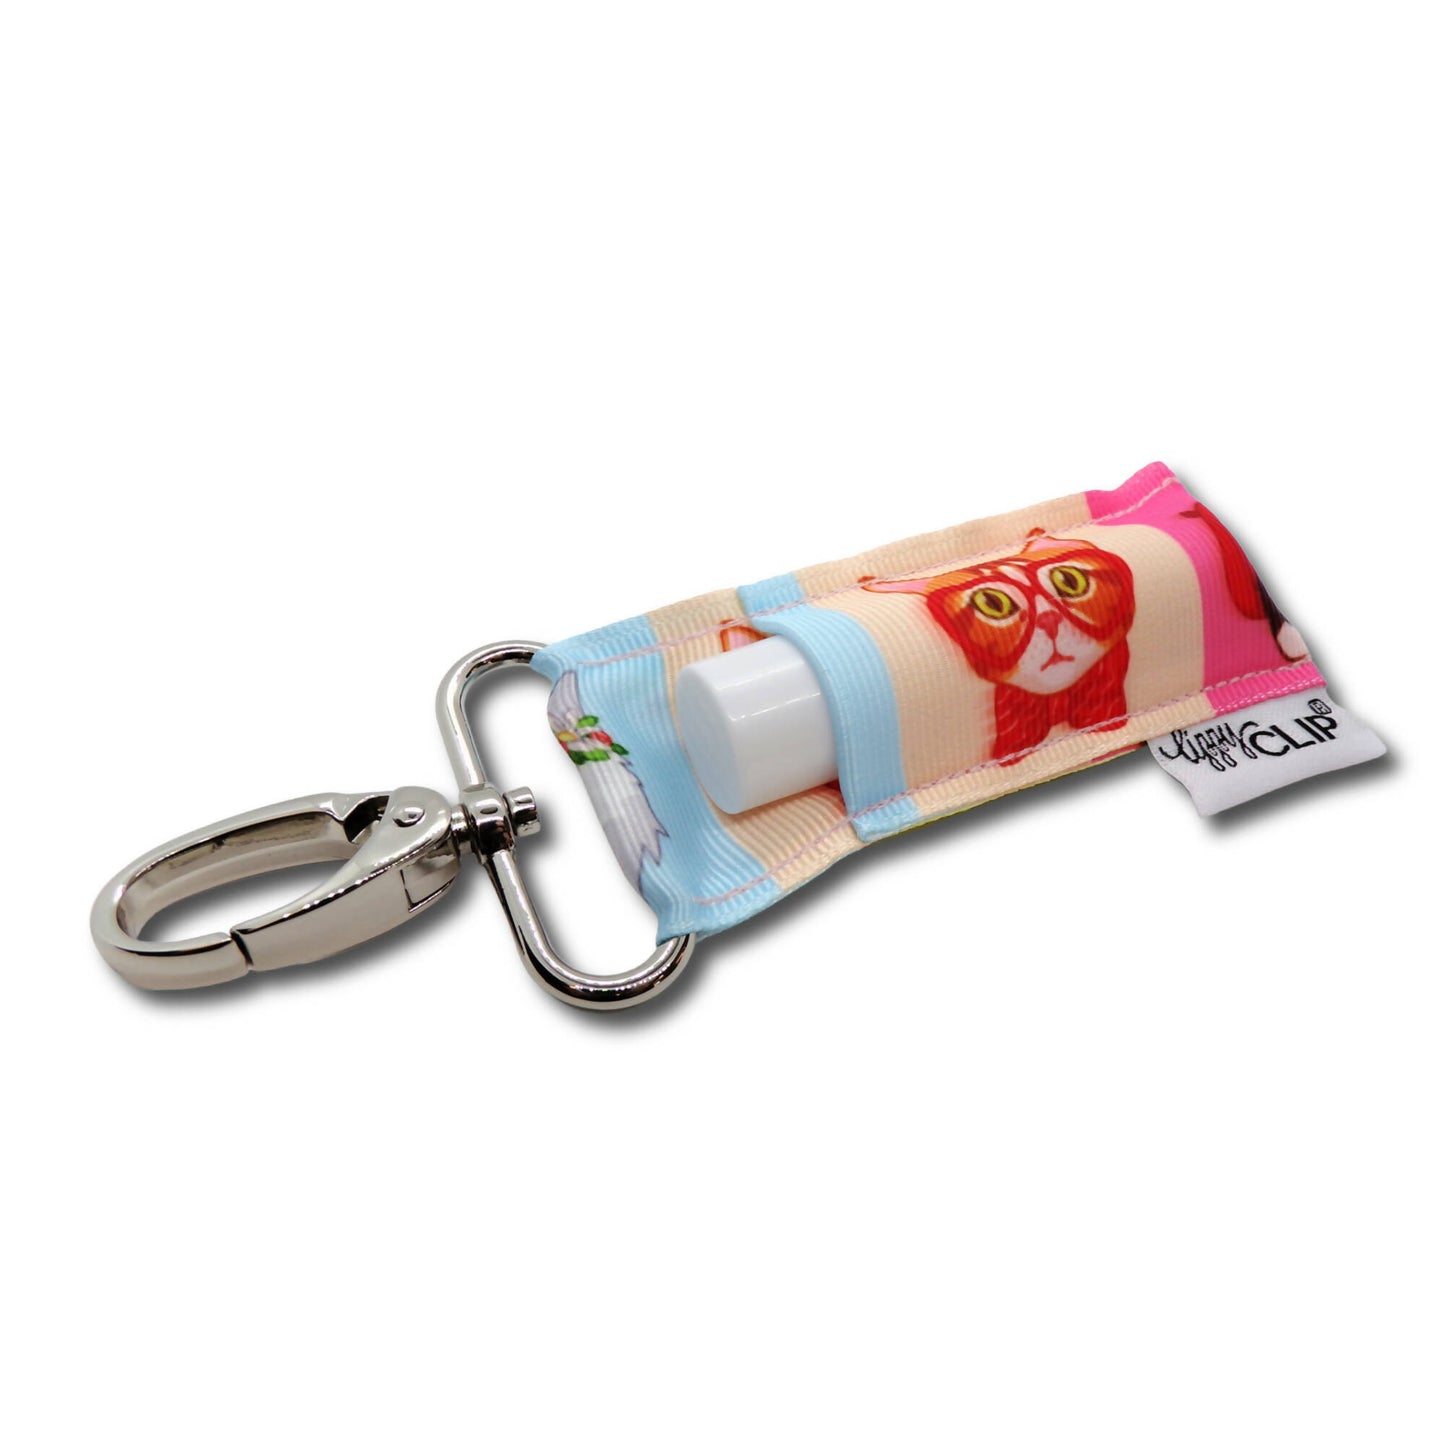 Quirky Cats Lippyclip Lip Balm Holder for Chapstick